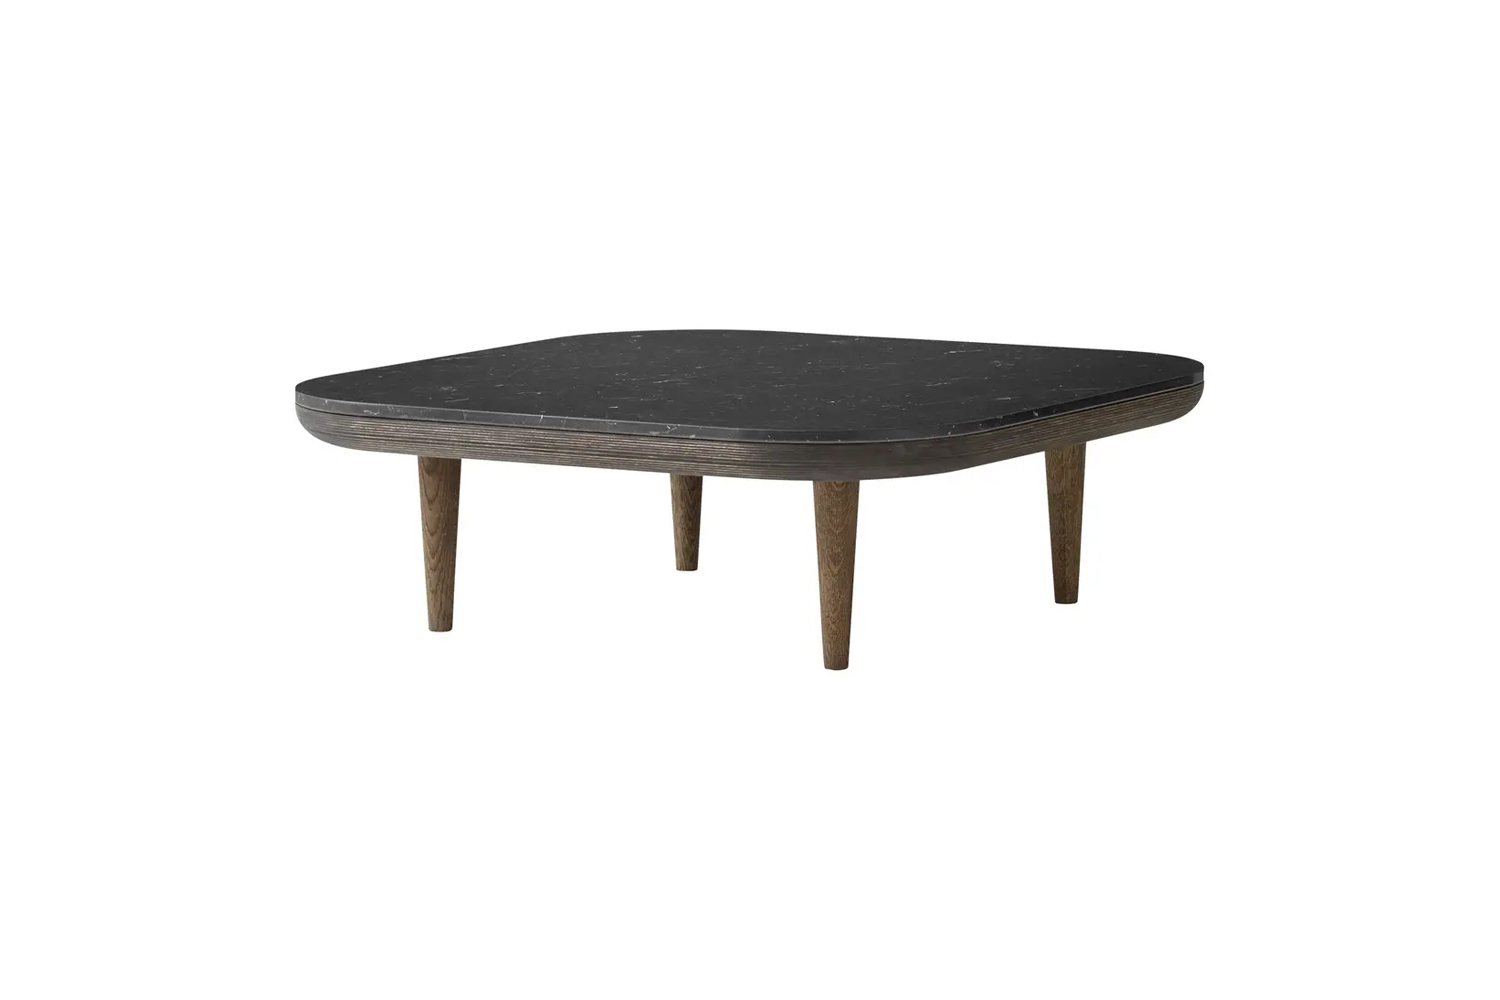 the coffee table is the &tradition fly coffee table in smoke oak and nero m 16